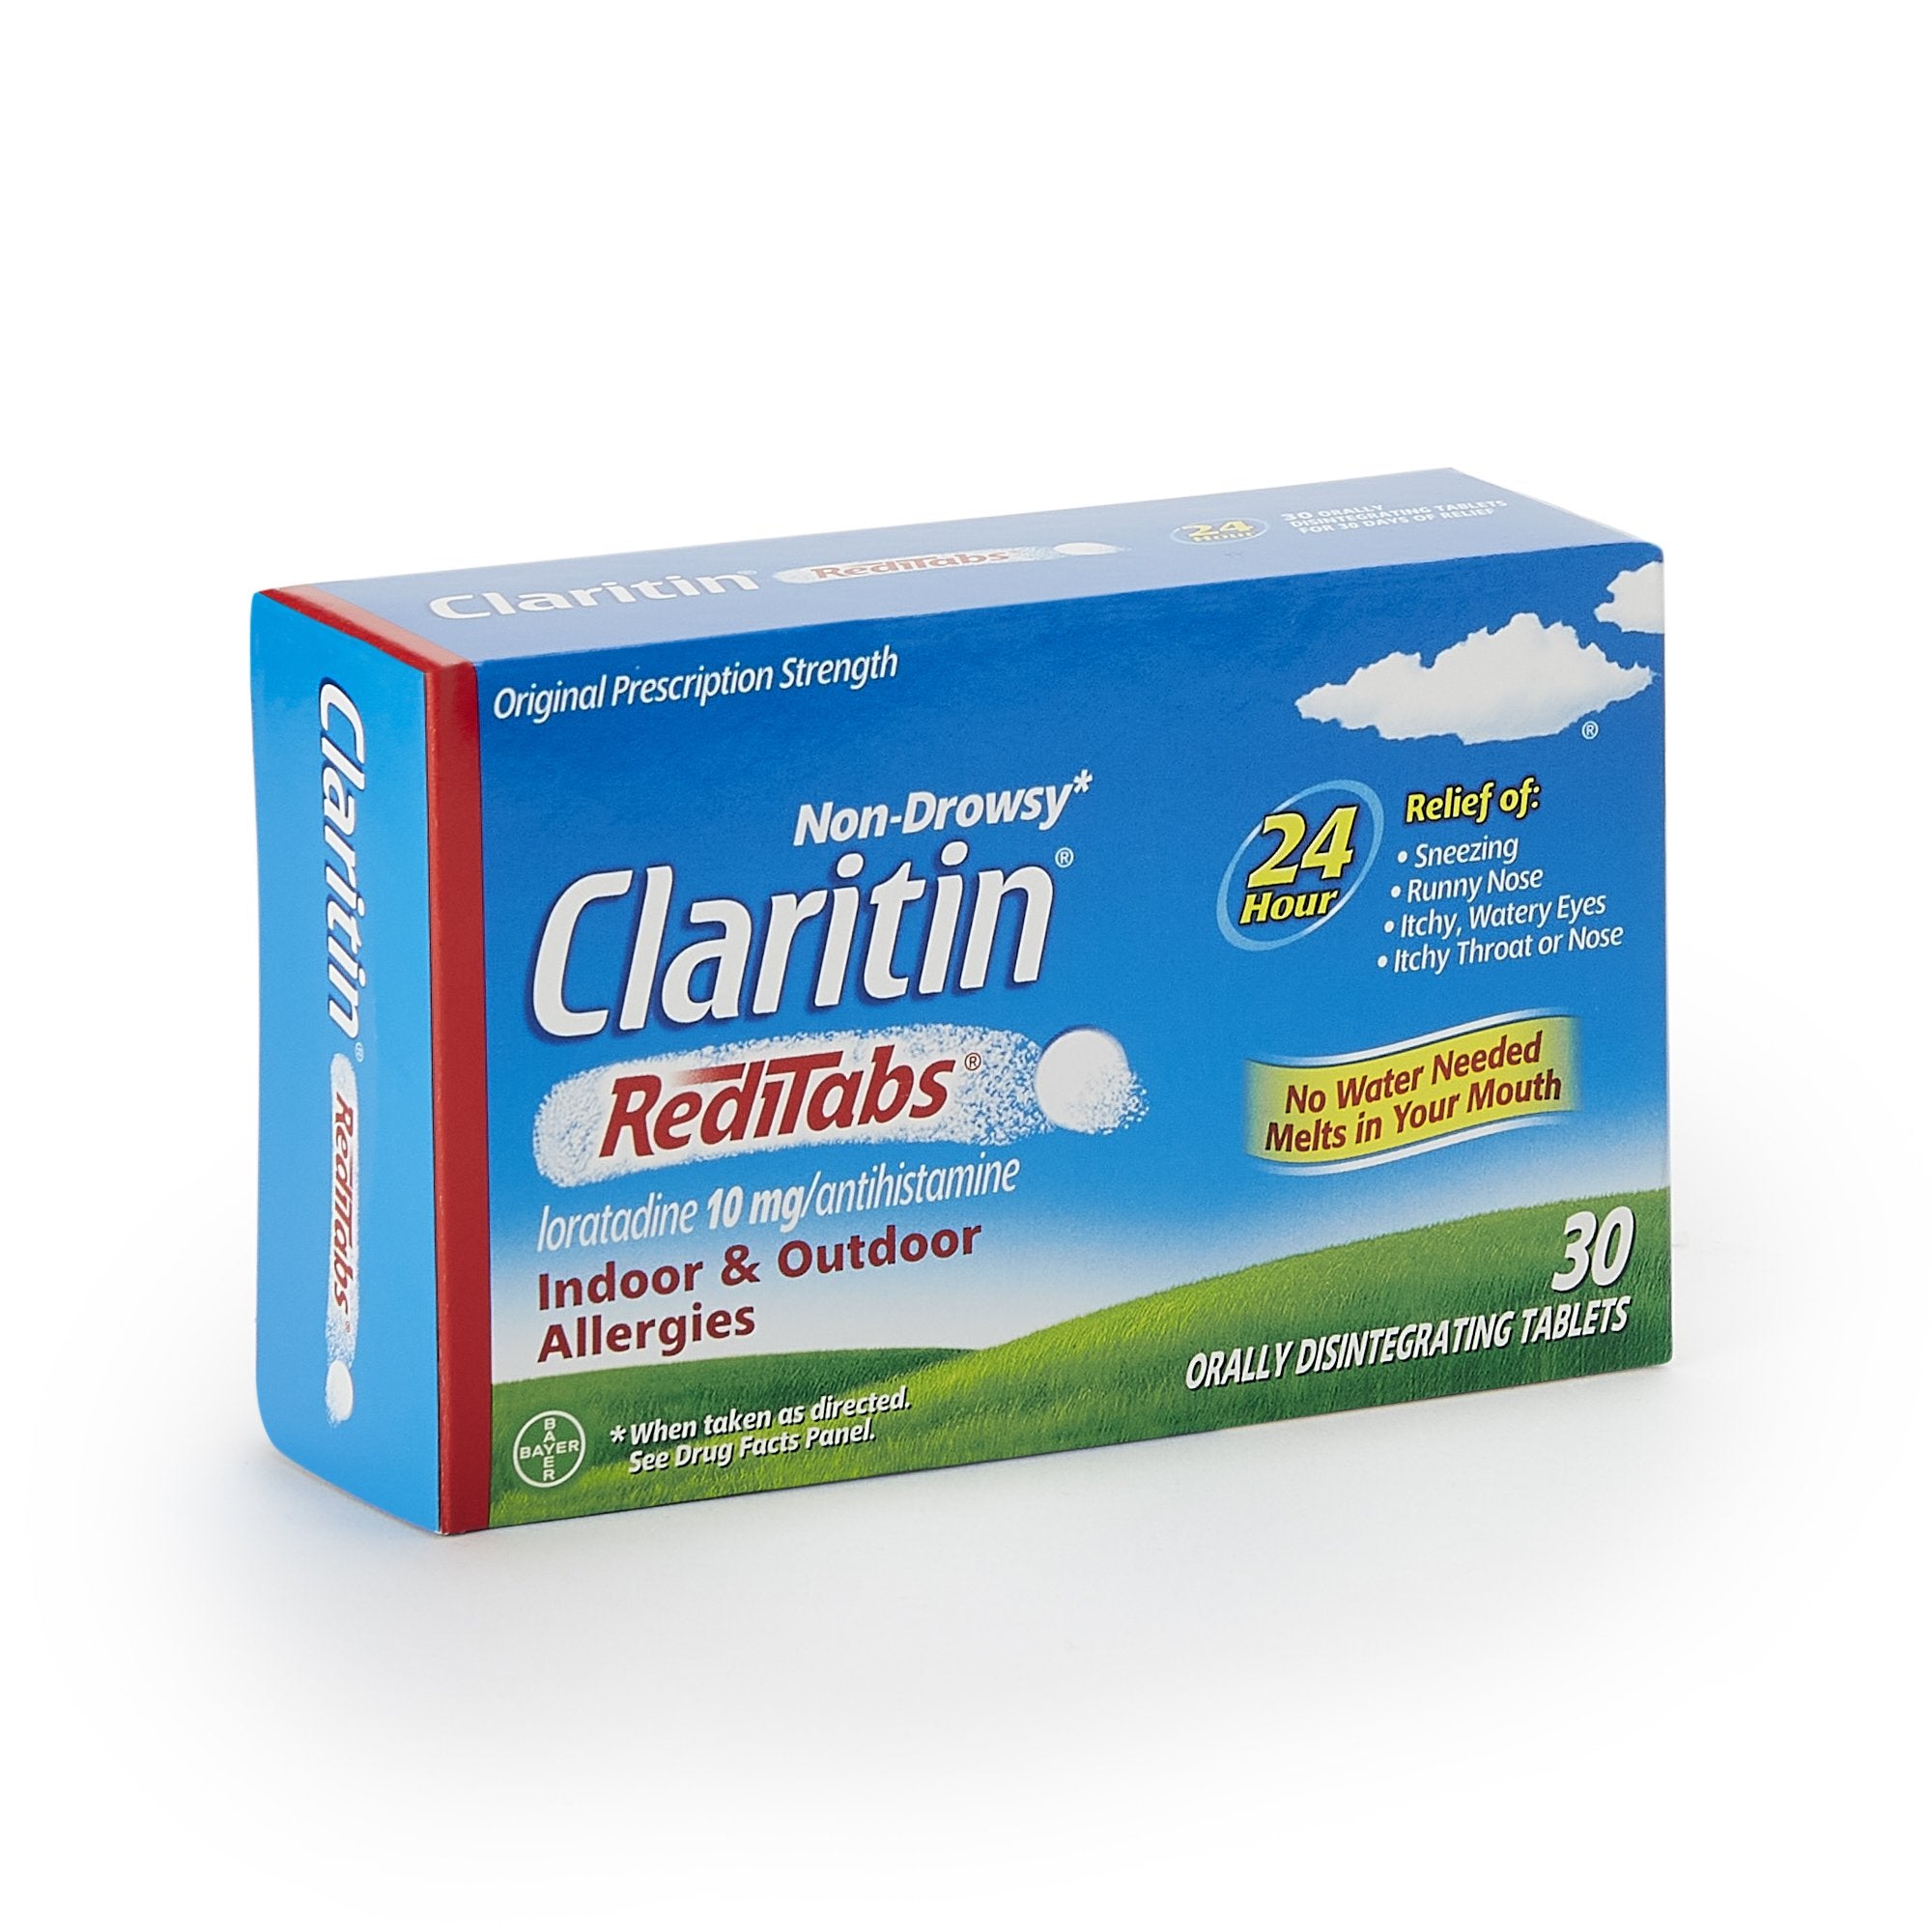 Allergy Relief Claritin Redi Tabs 10 mg Strength Tablet 30 per Box